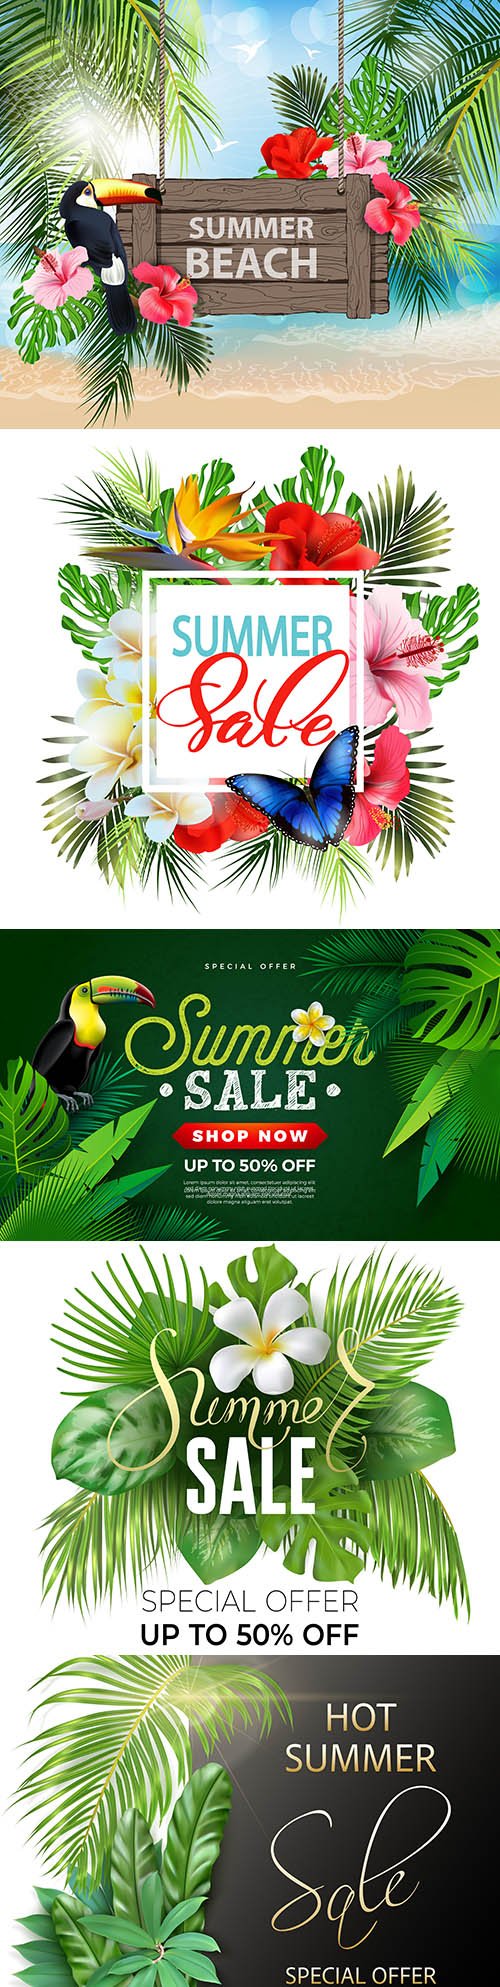 Summer sale background with tropical flowers and birds